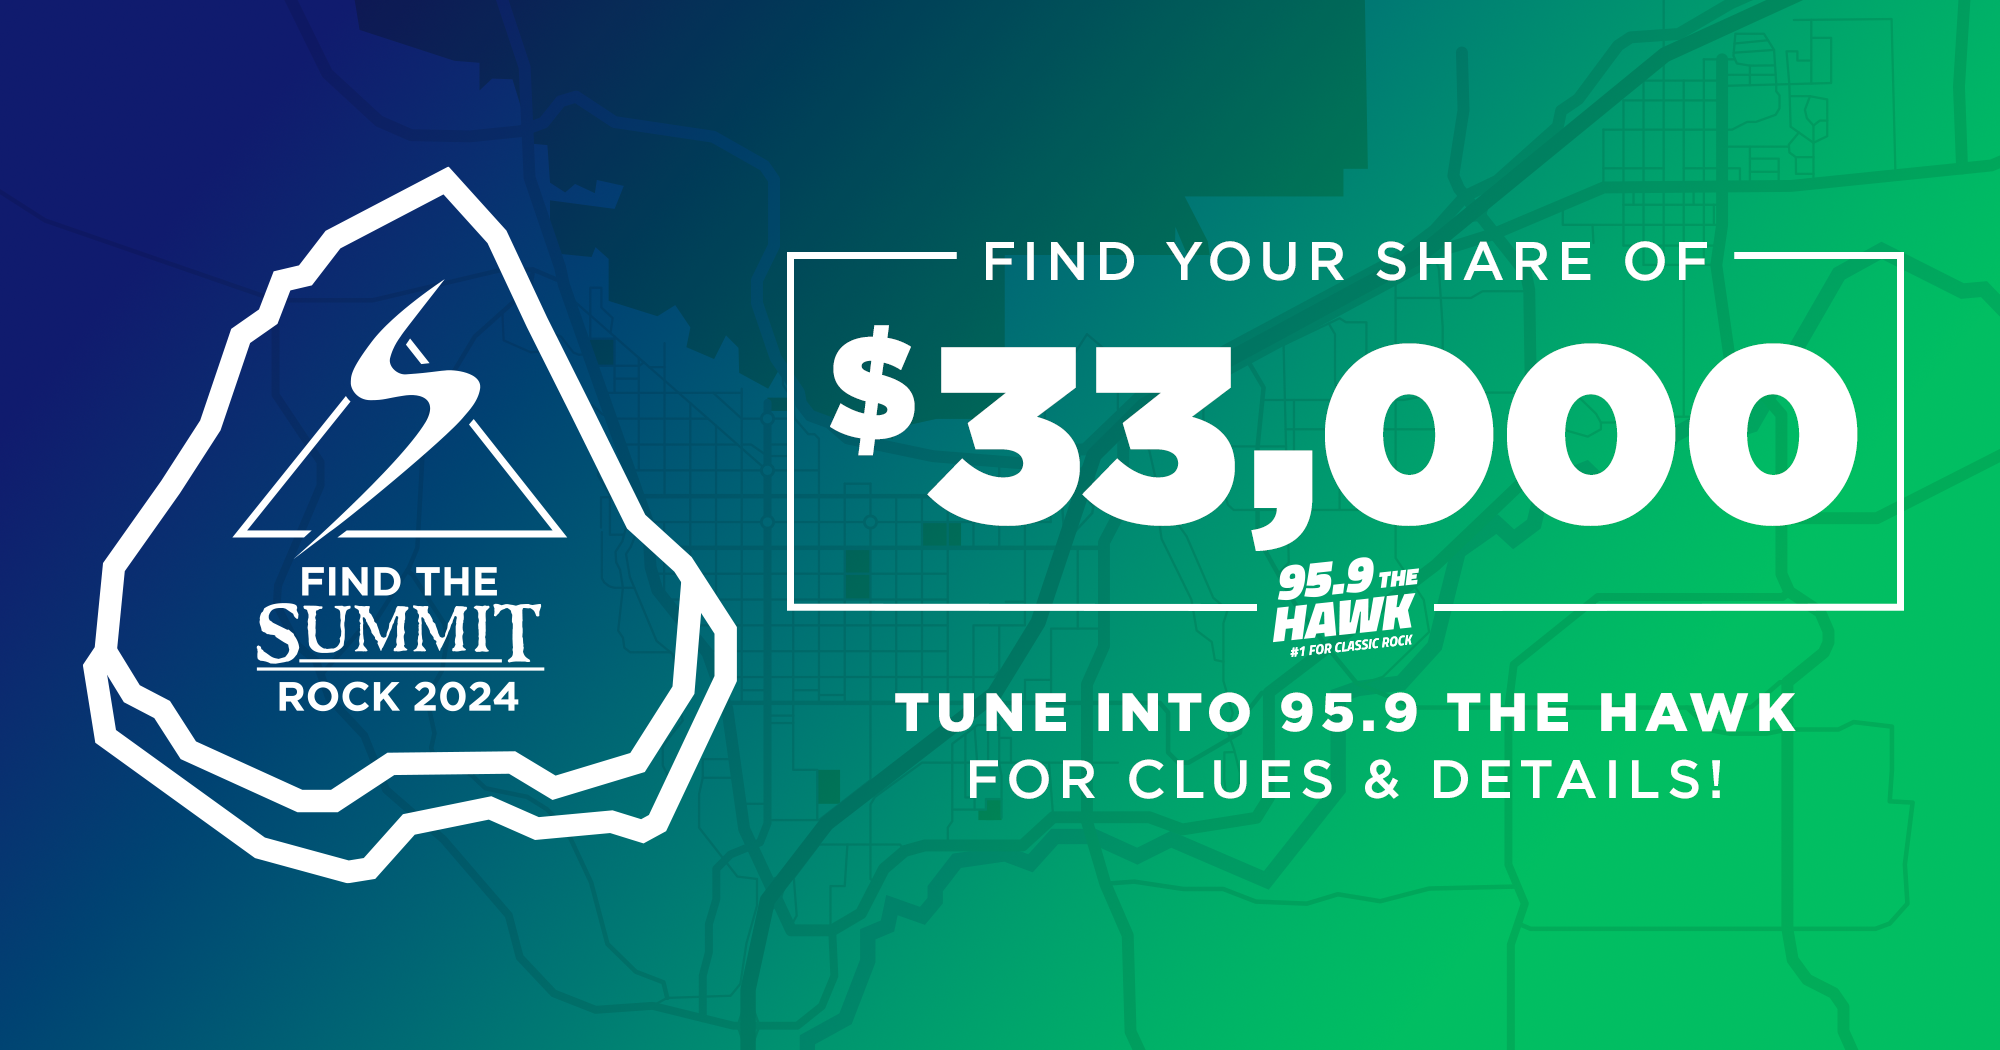 Find your share of $30,000 when you Find the Summit Rock!